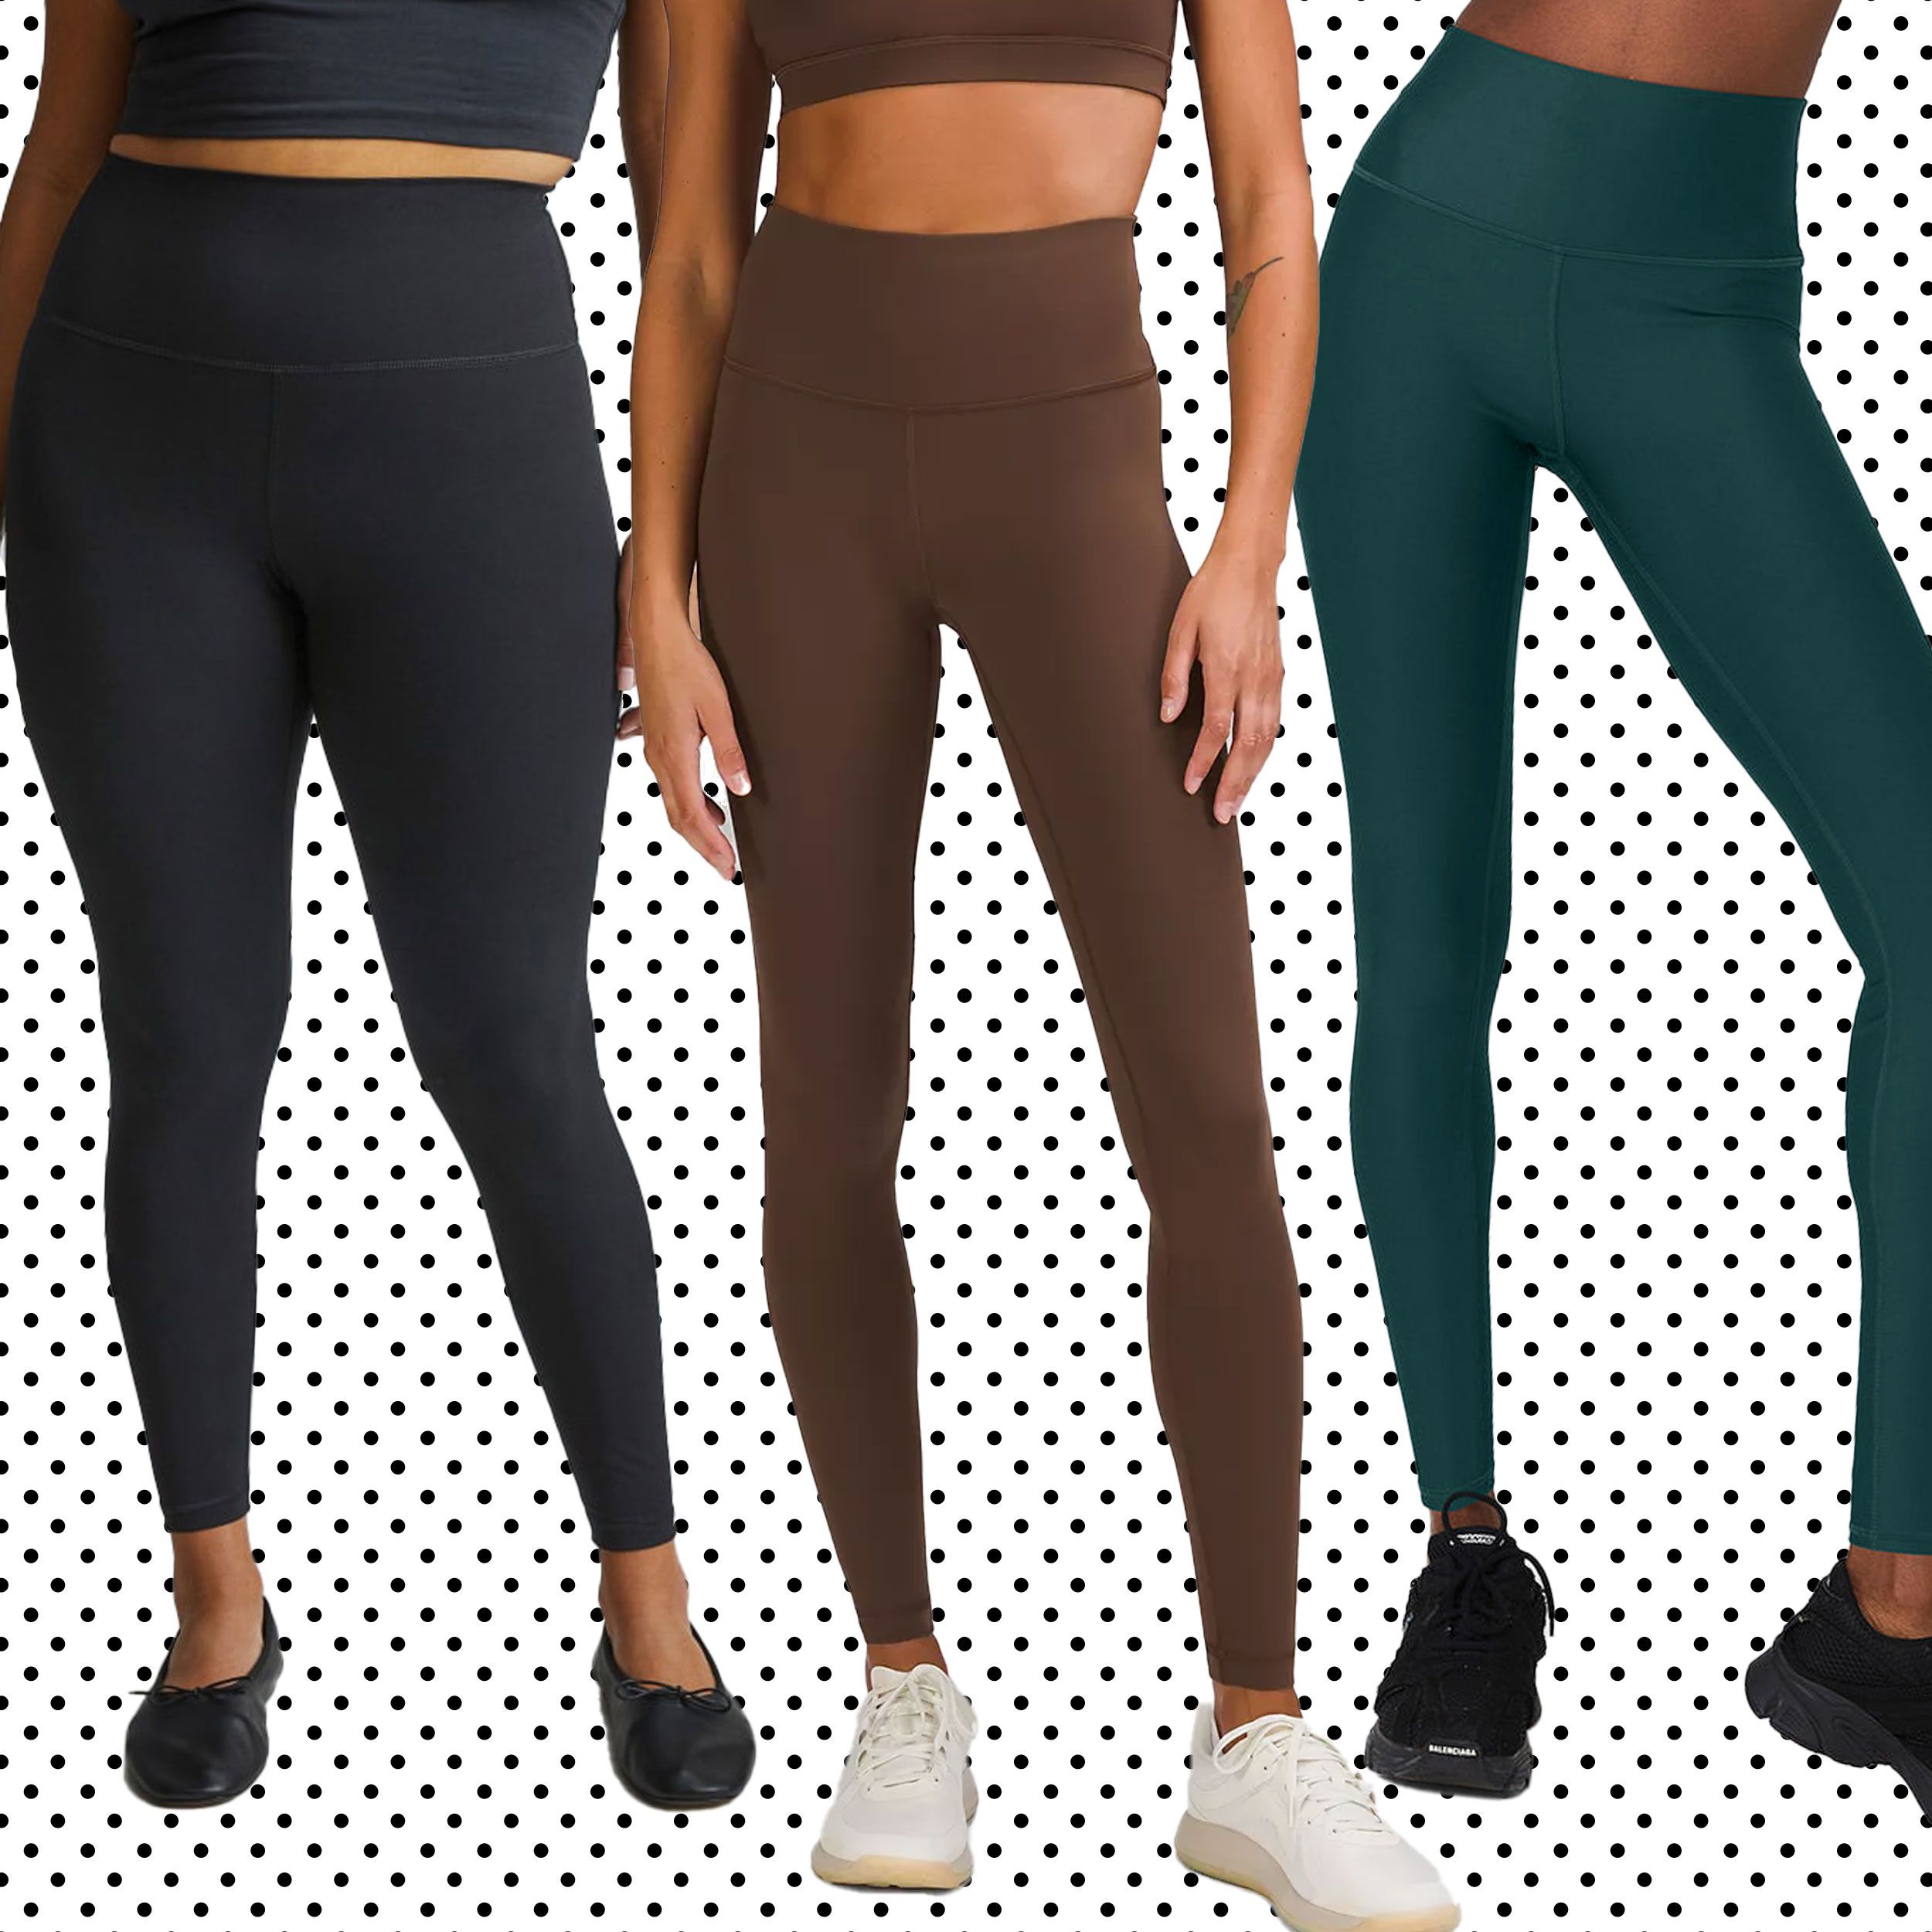 Best yoga pants and leggings for women 2023 | The Independent